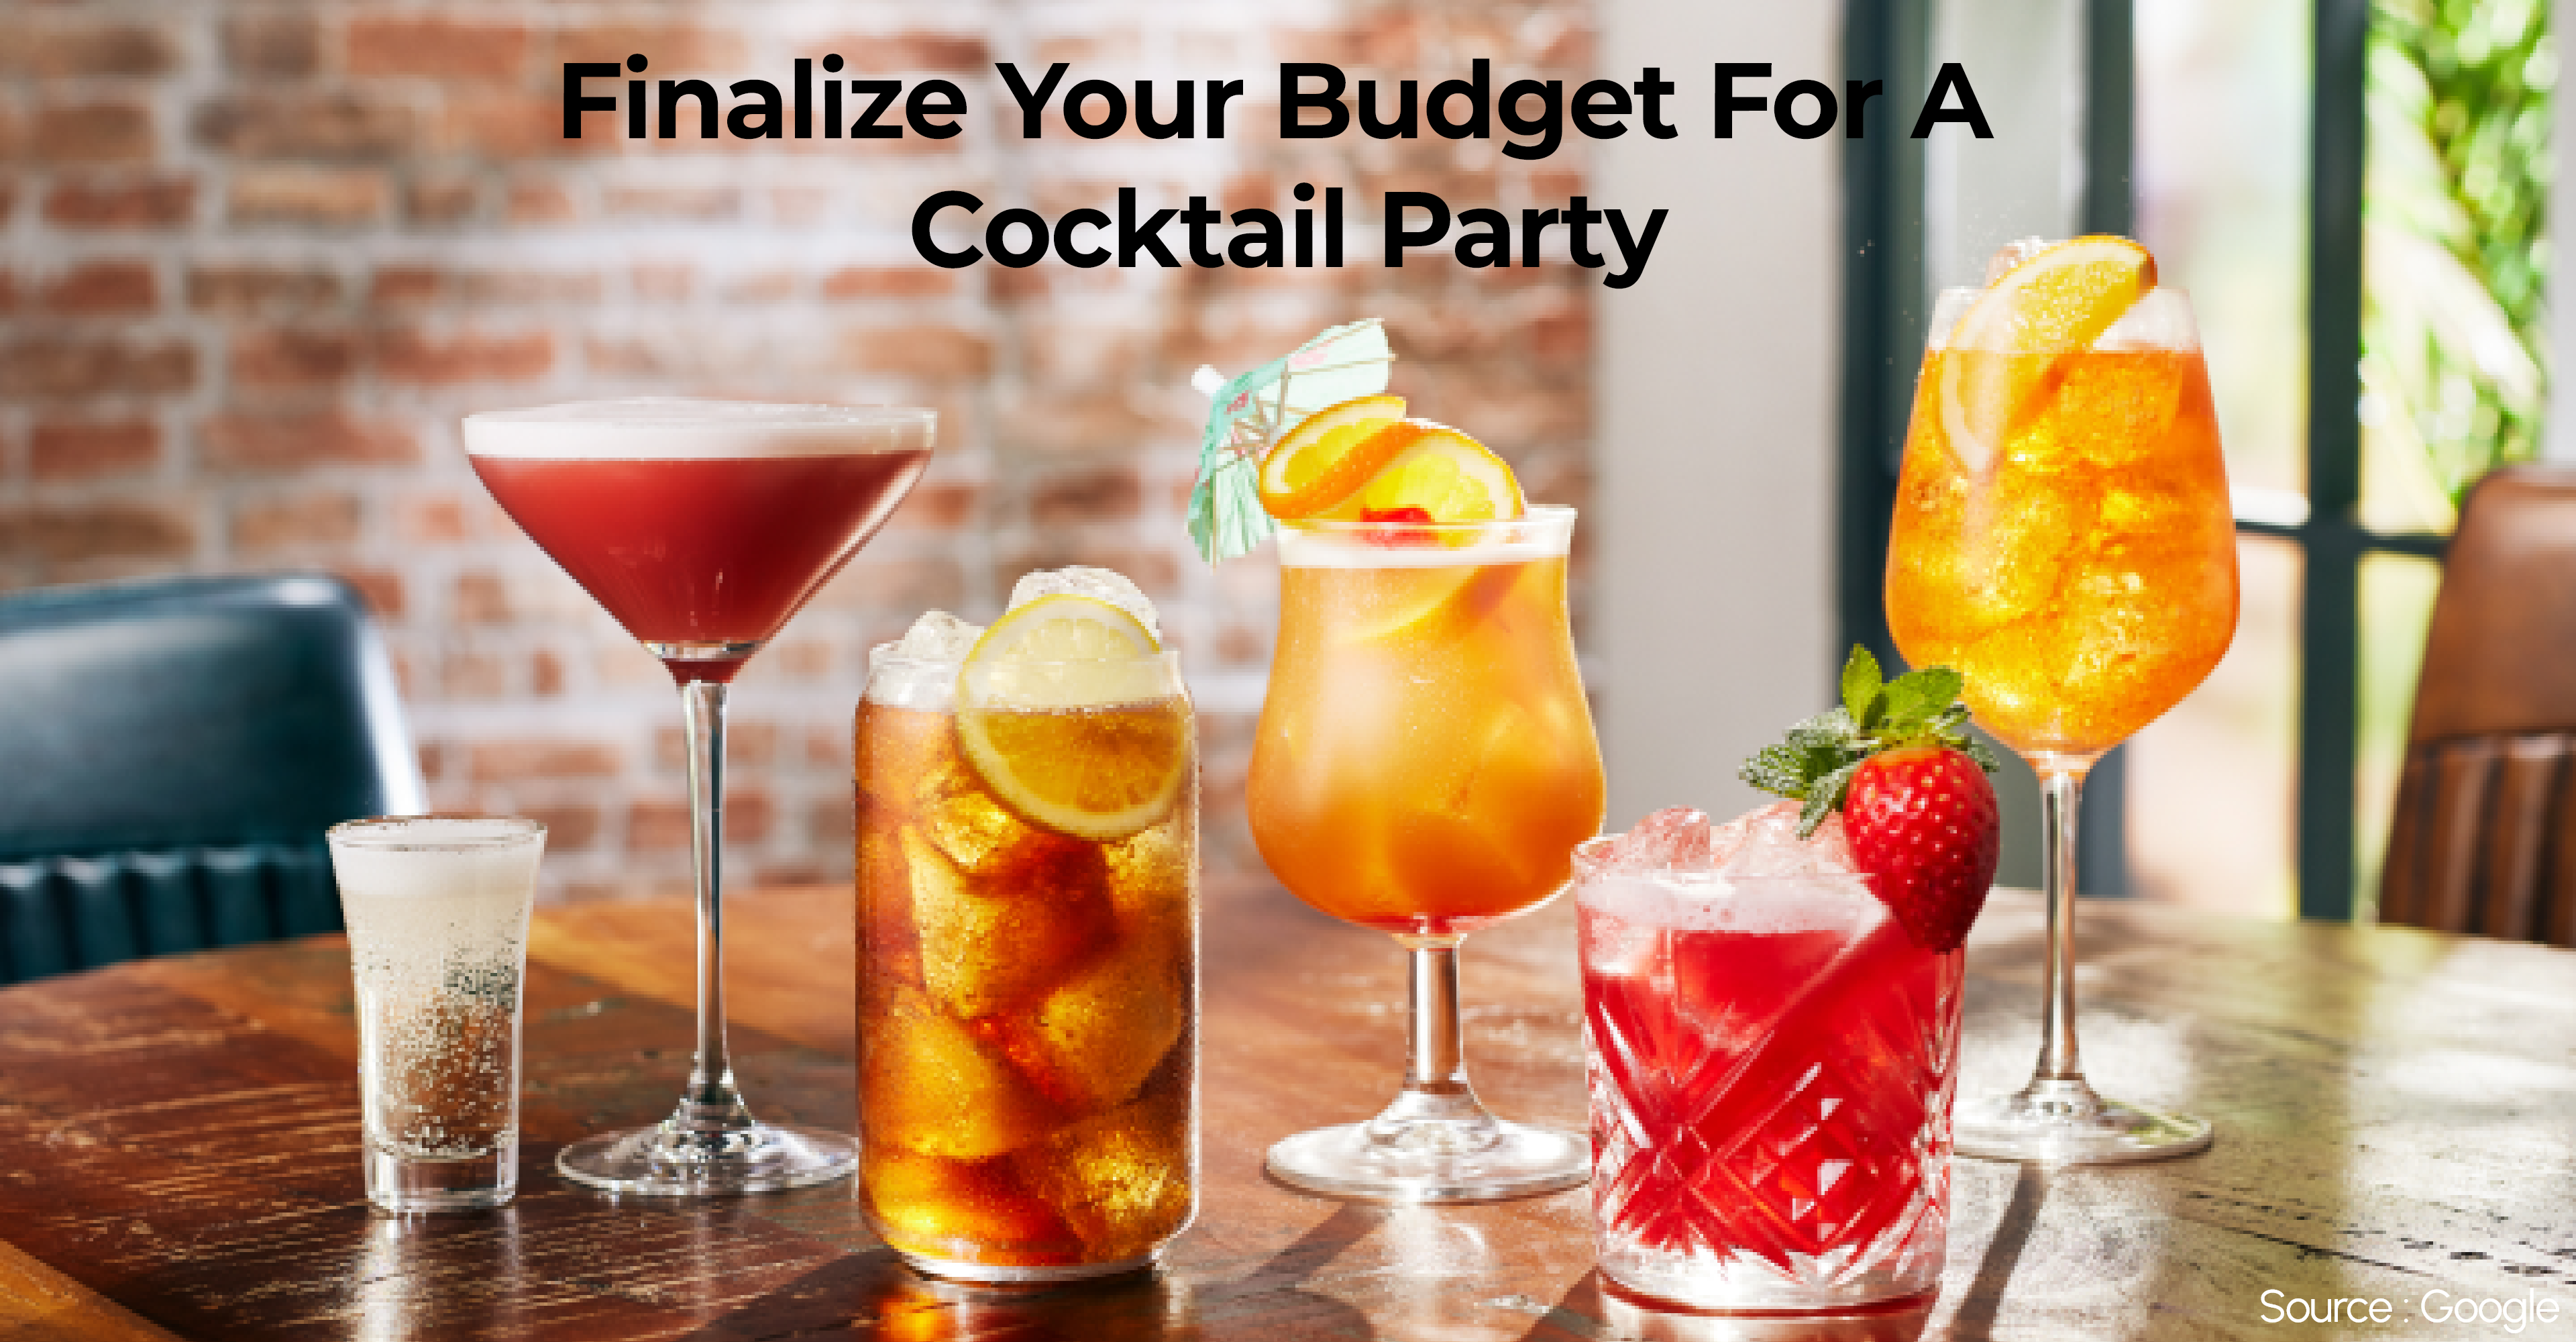 28 Party Drinks For When You're Ballin' On A Budget